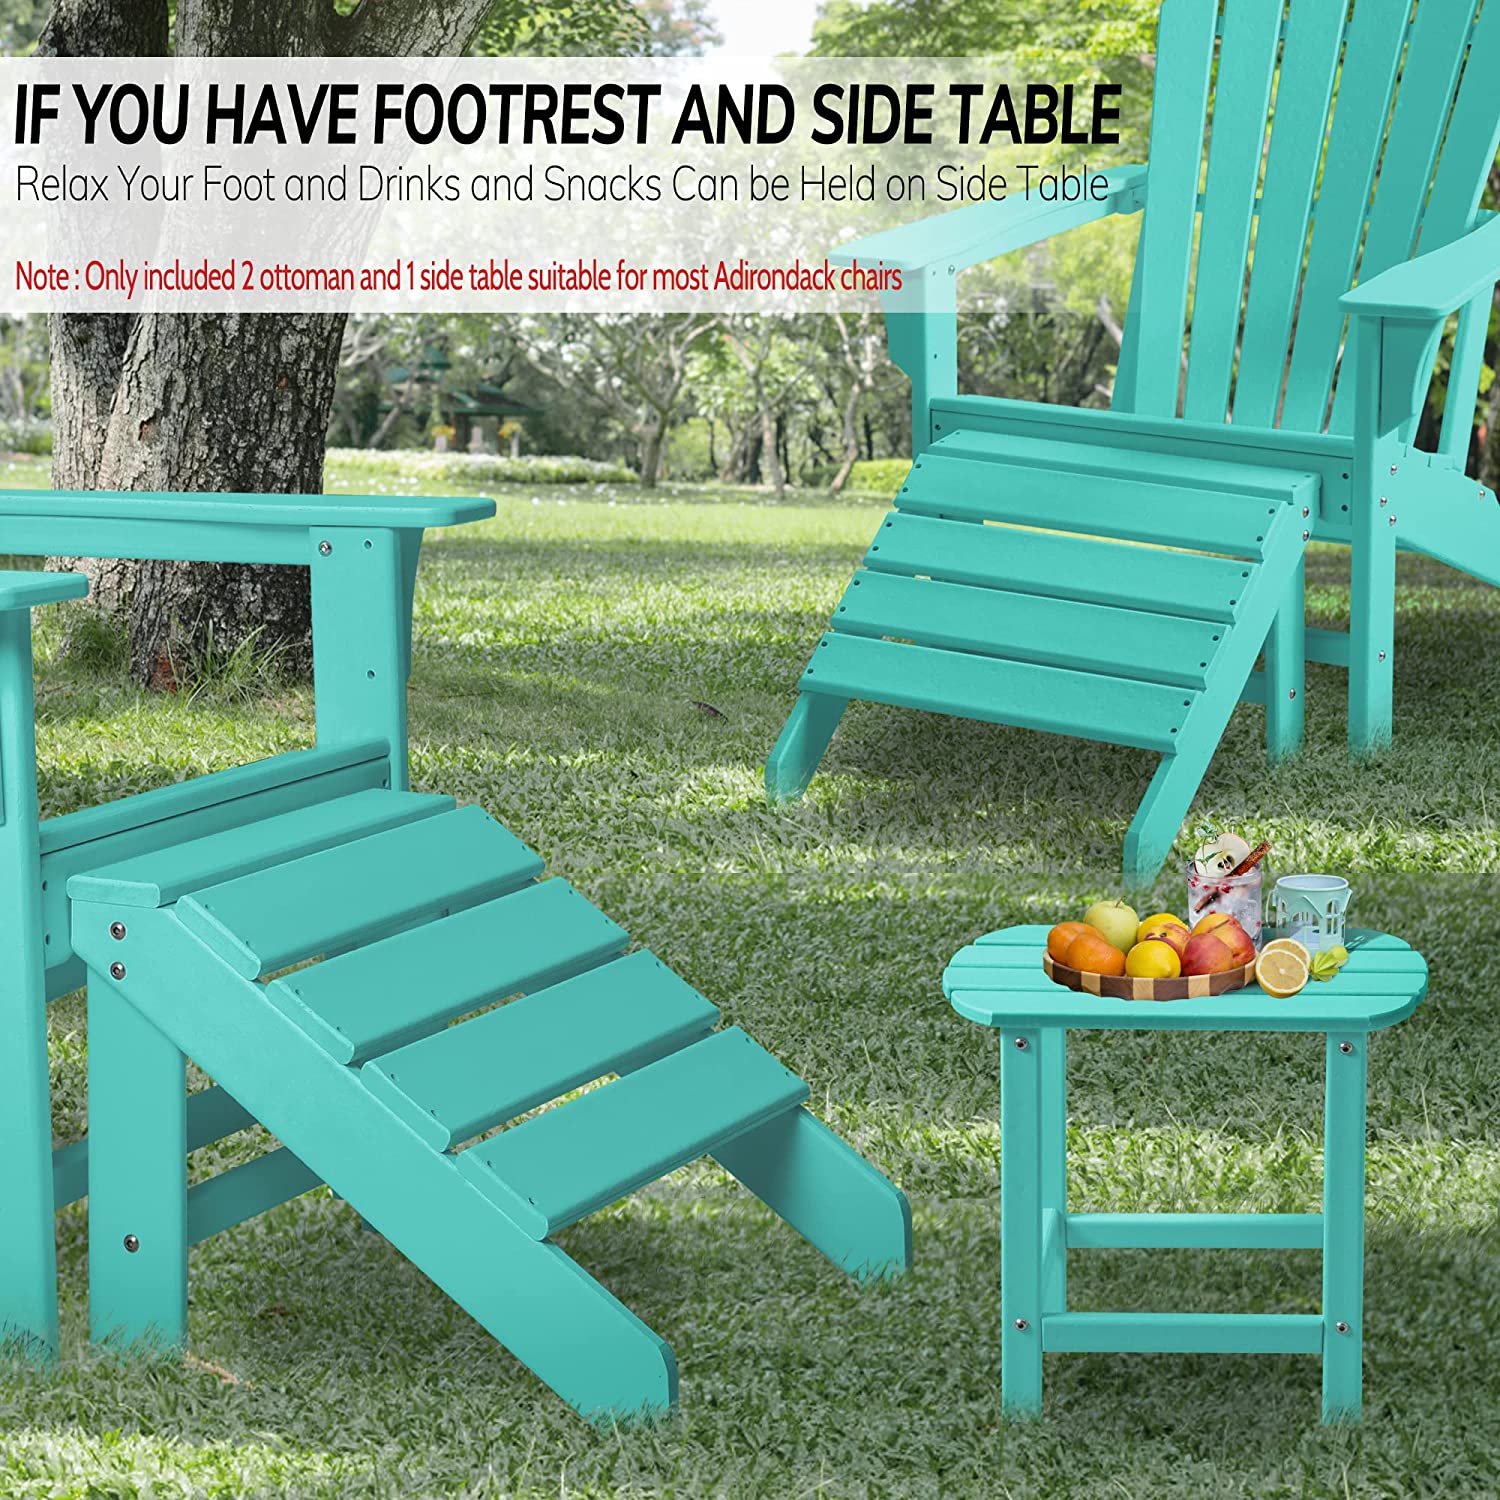 FHFO Adirondack Ottoman and Side Table for Adirondack Chairs, 2 Pieces Outdoor Adirondack Footrest & 1 Piece End Table, Weather Resistant Footstool Table for Adirondack Chair （Lake Blue） - image 3 of 5